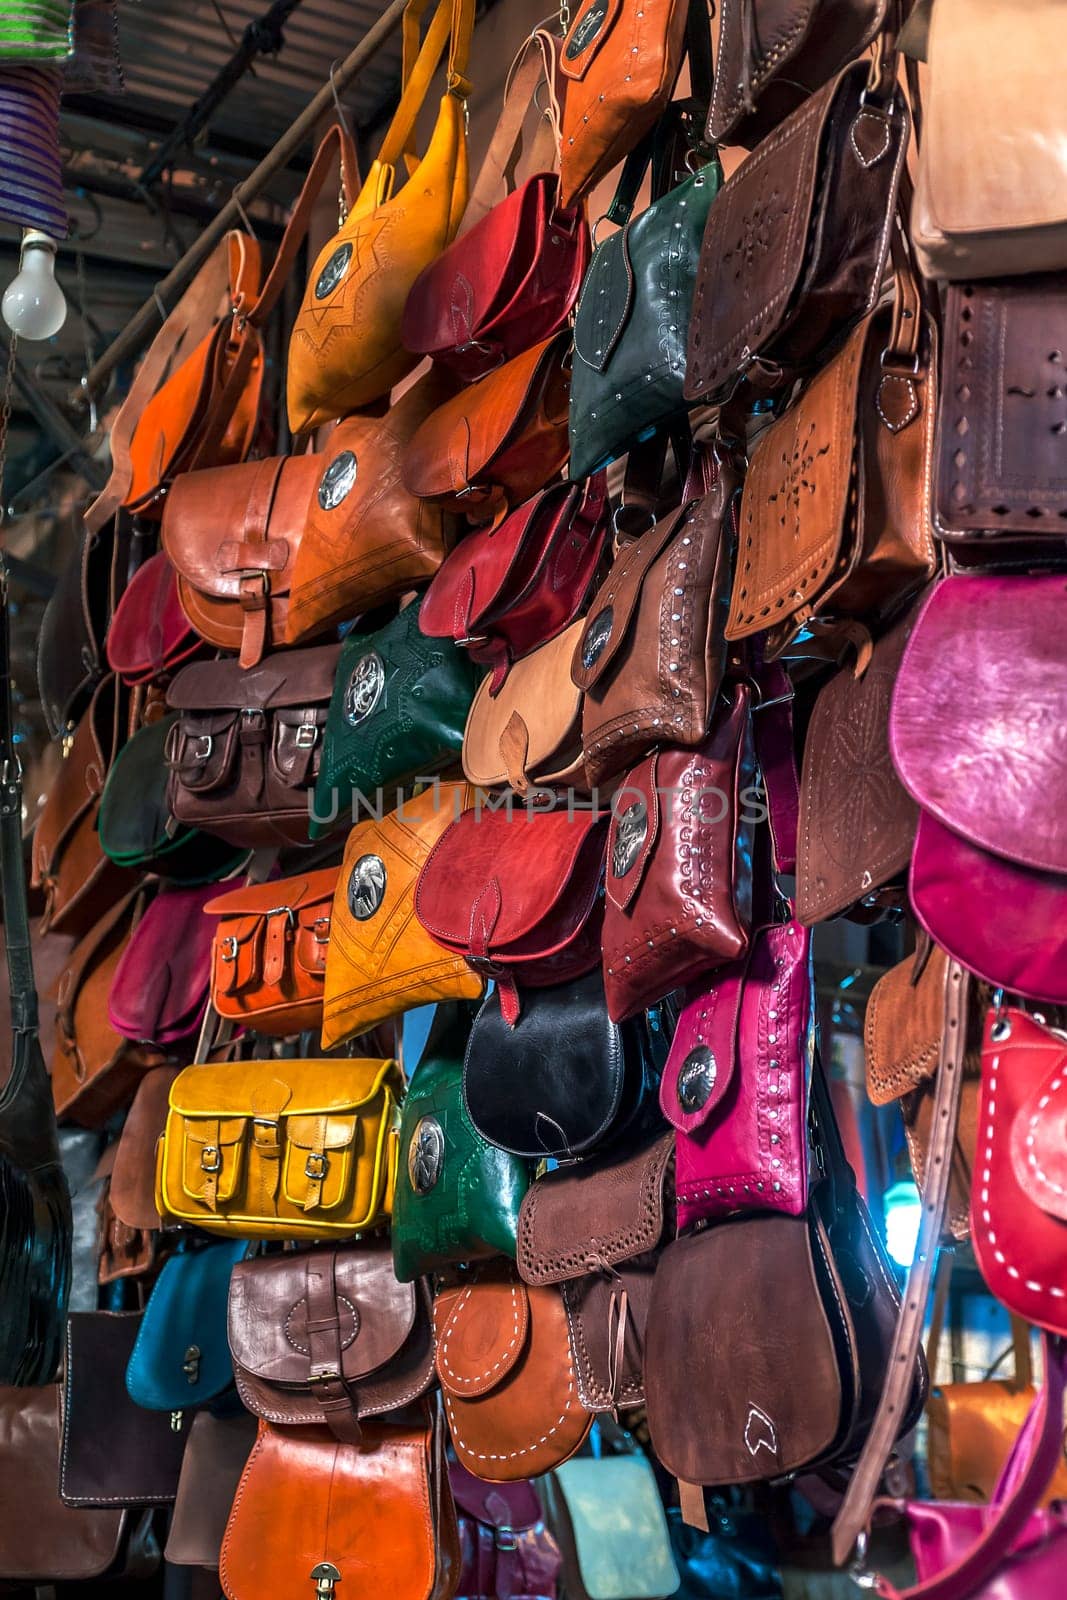 Handmade leather bags for sale in the Medina of Marrakech, Morocco